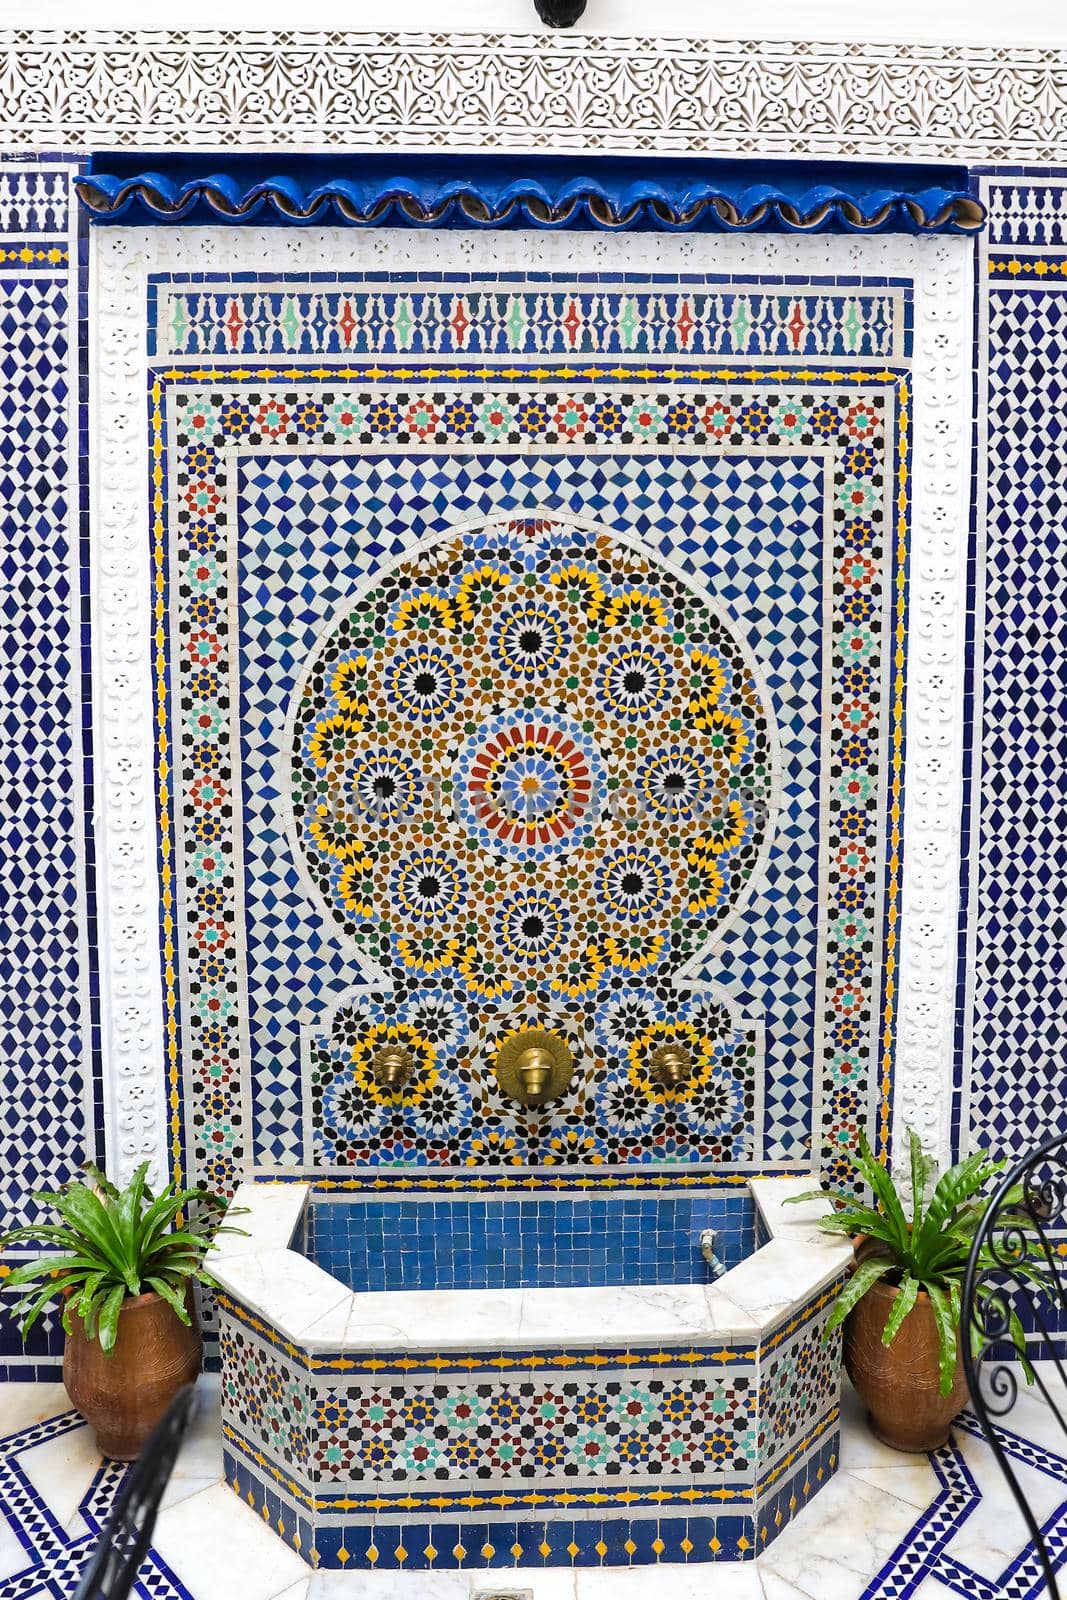 Blue Tiled Fountain in a Building, Fez City, Morocco